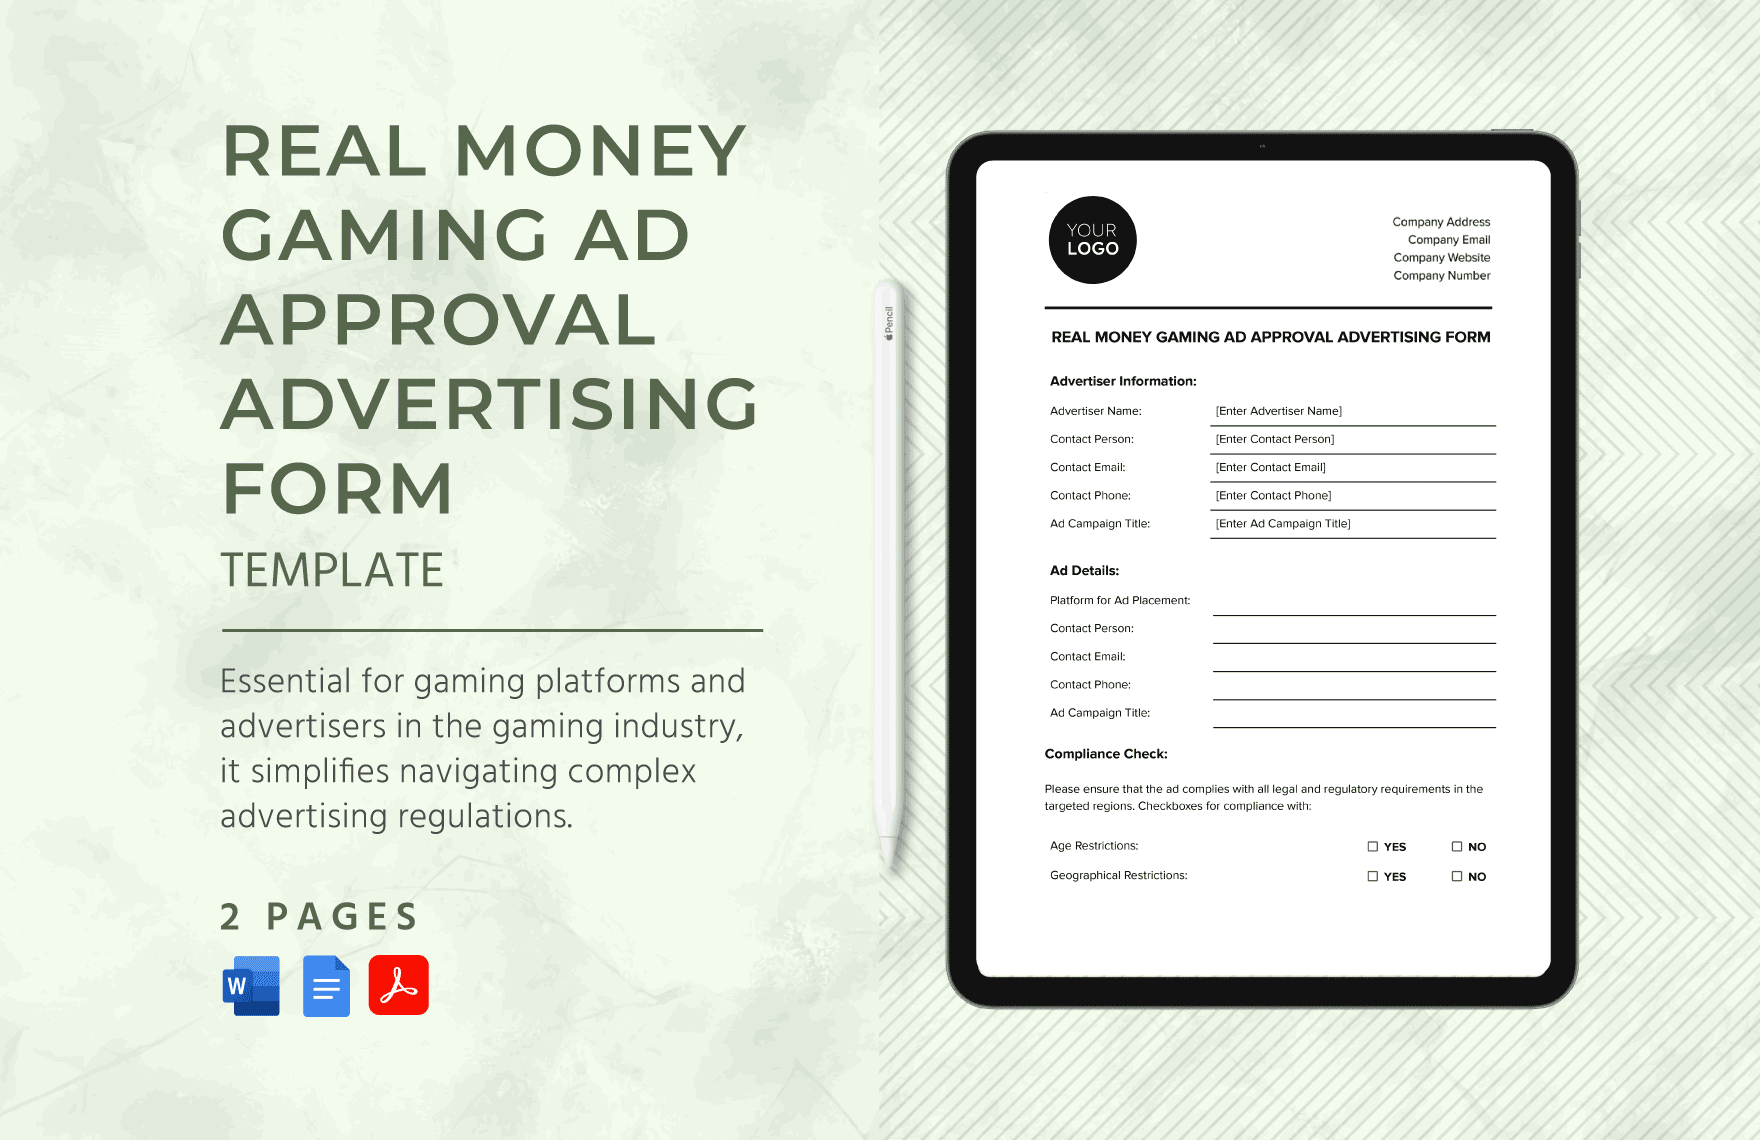 Real Money Gaming Ad Approval Advertising Form Template in Word, Google Docs, PDF